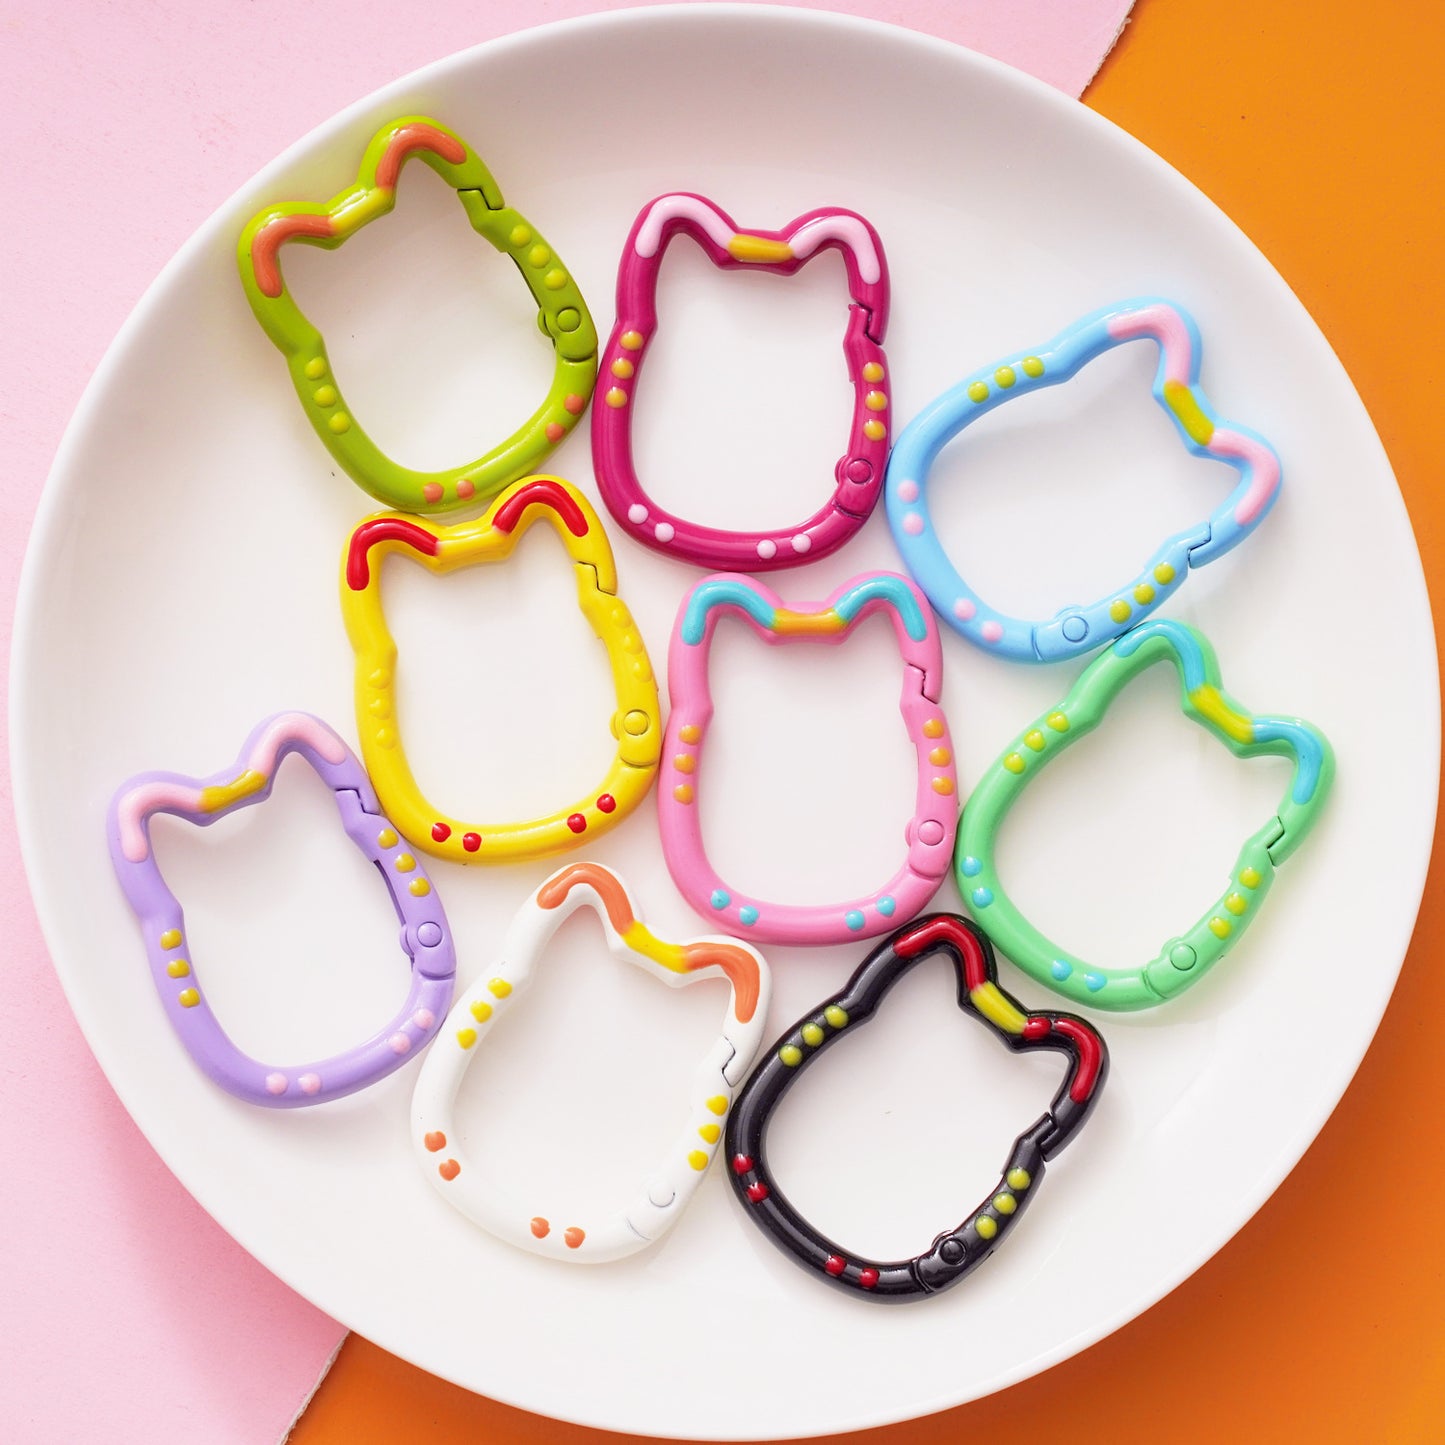 20 Pieces Cute Cat Shape Ring Buckle for DIY Keychain Phone Chain